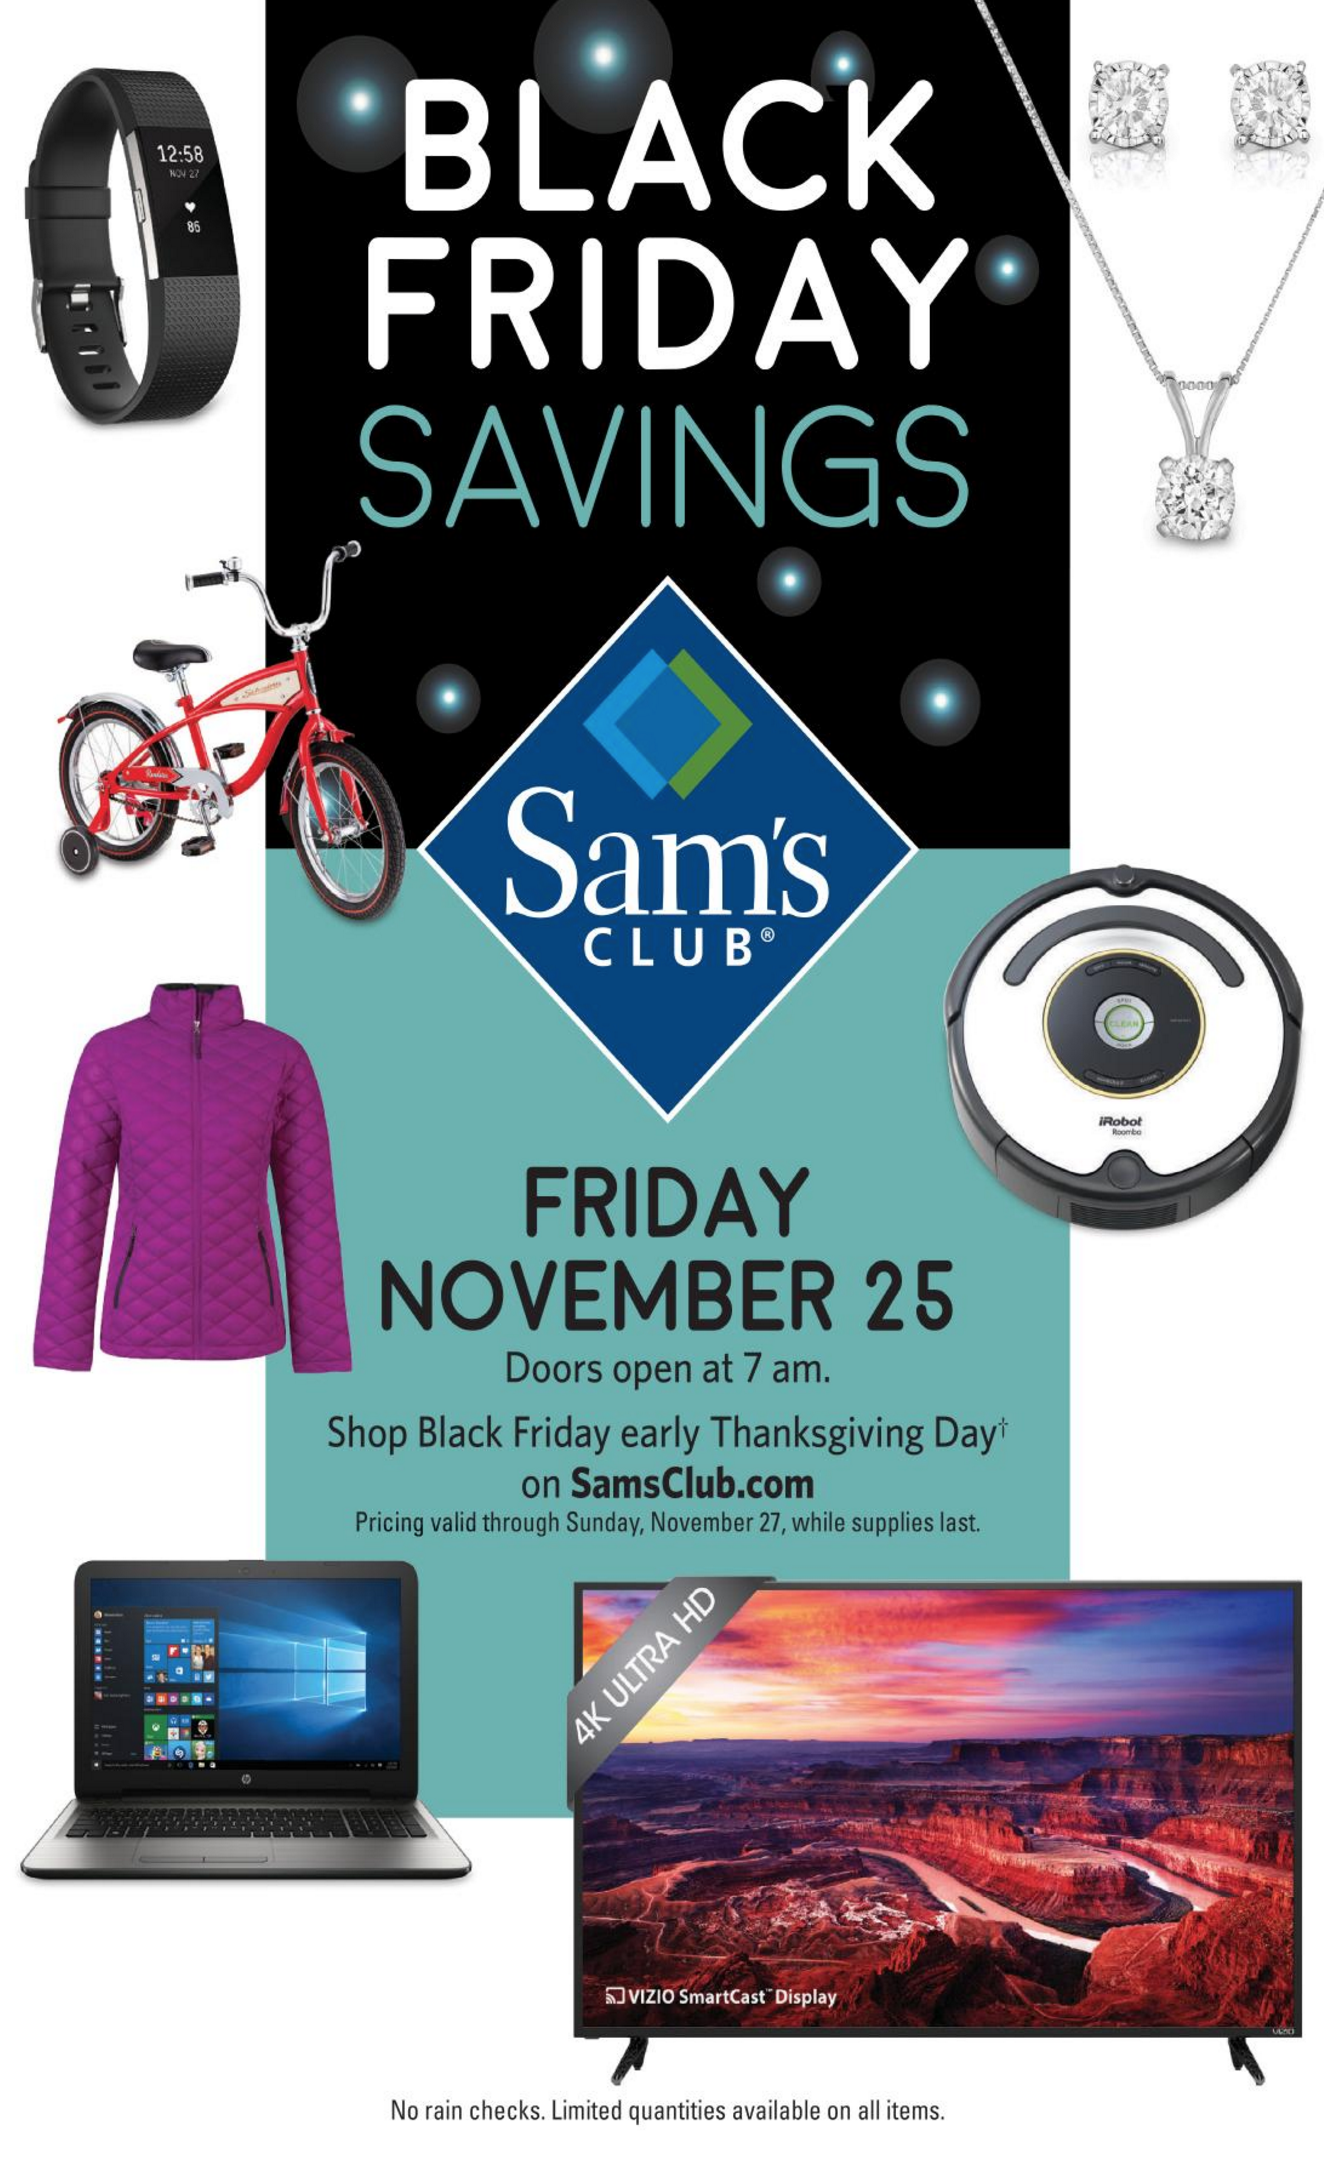 Sam's Club details its Black Friday plans plus a look at an